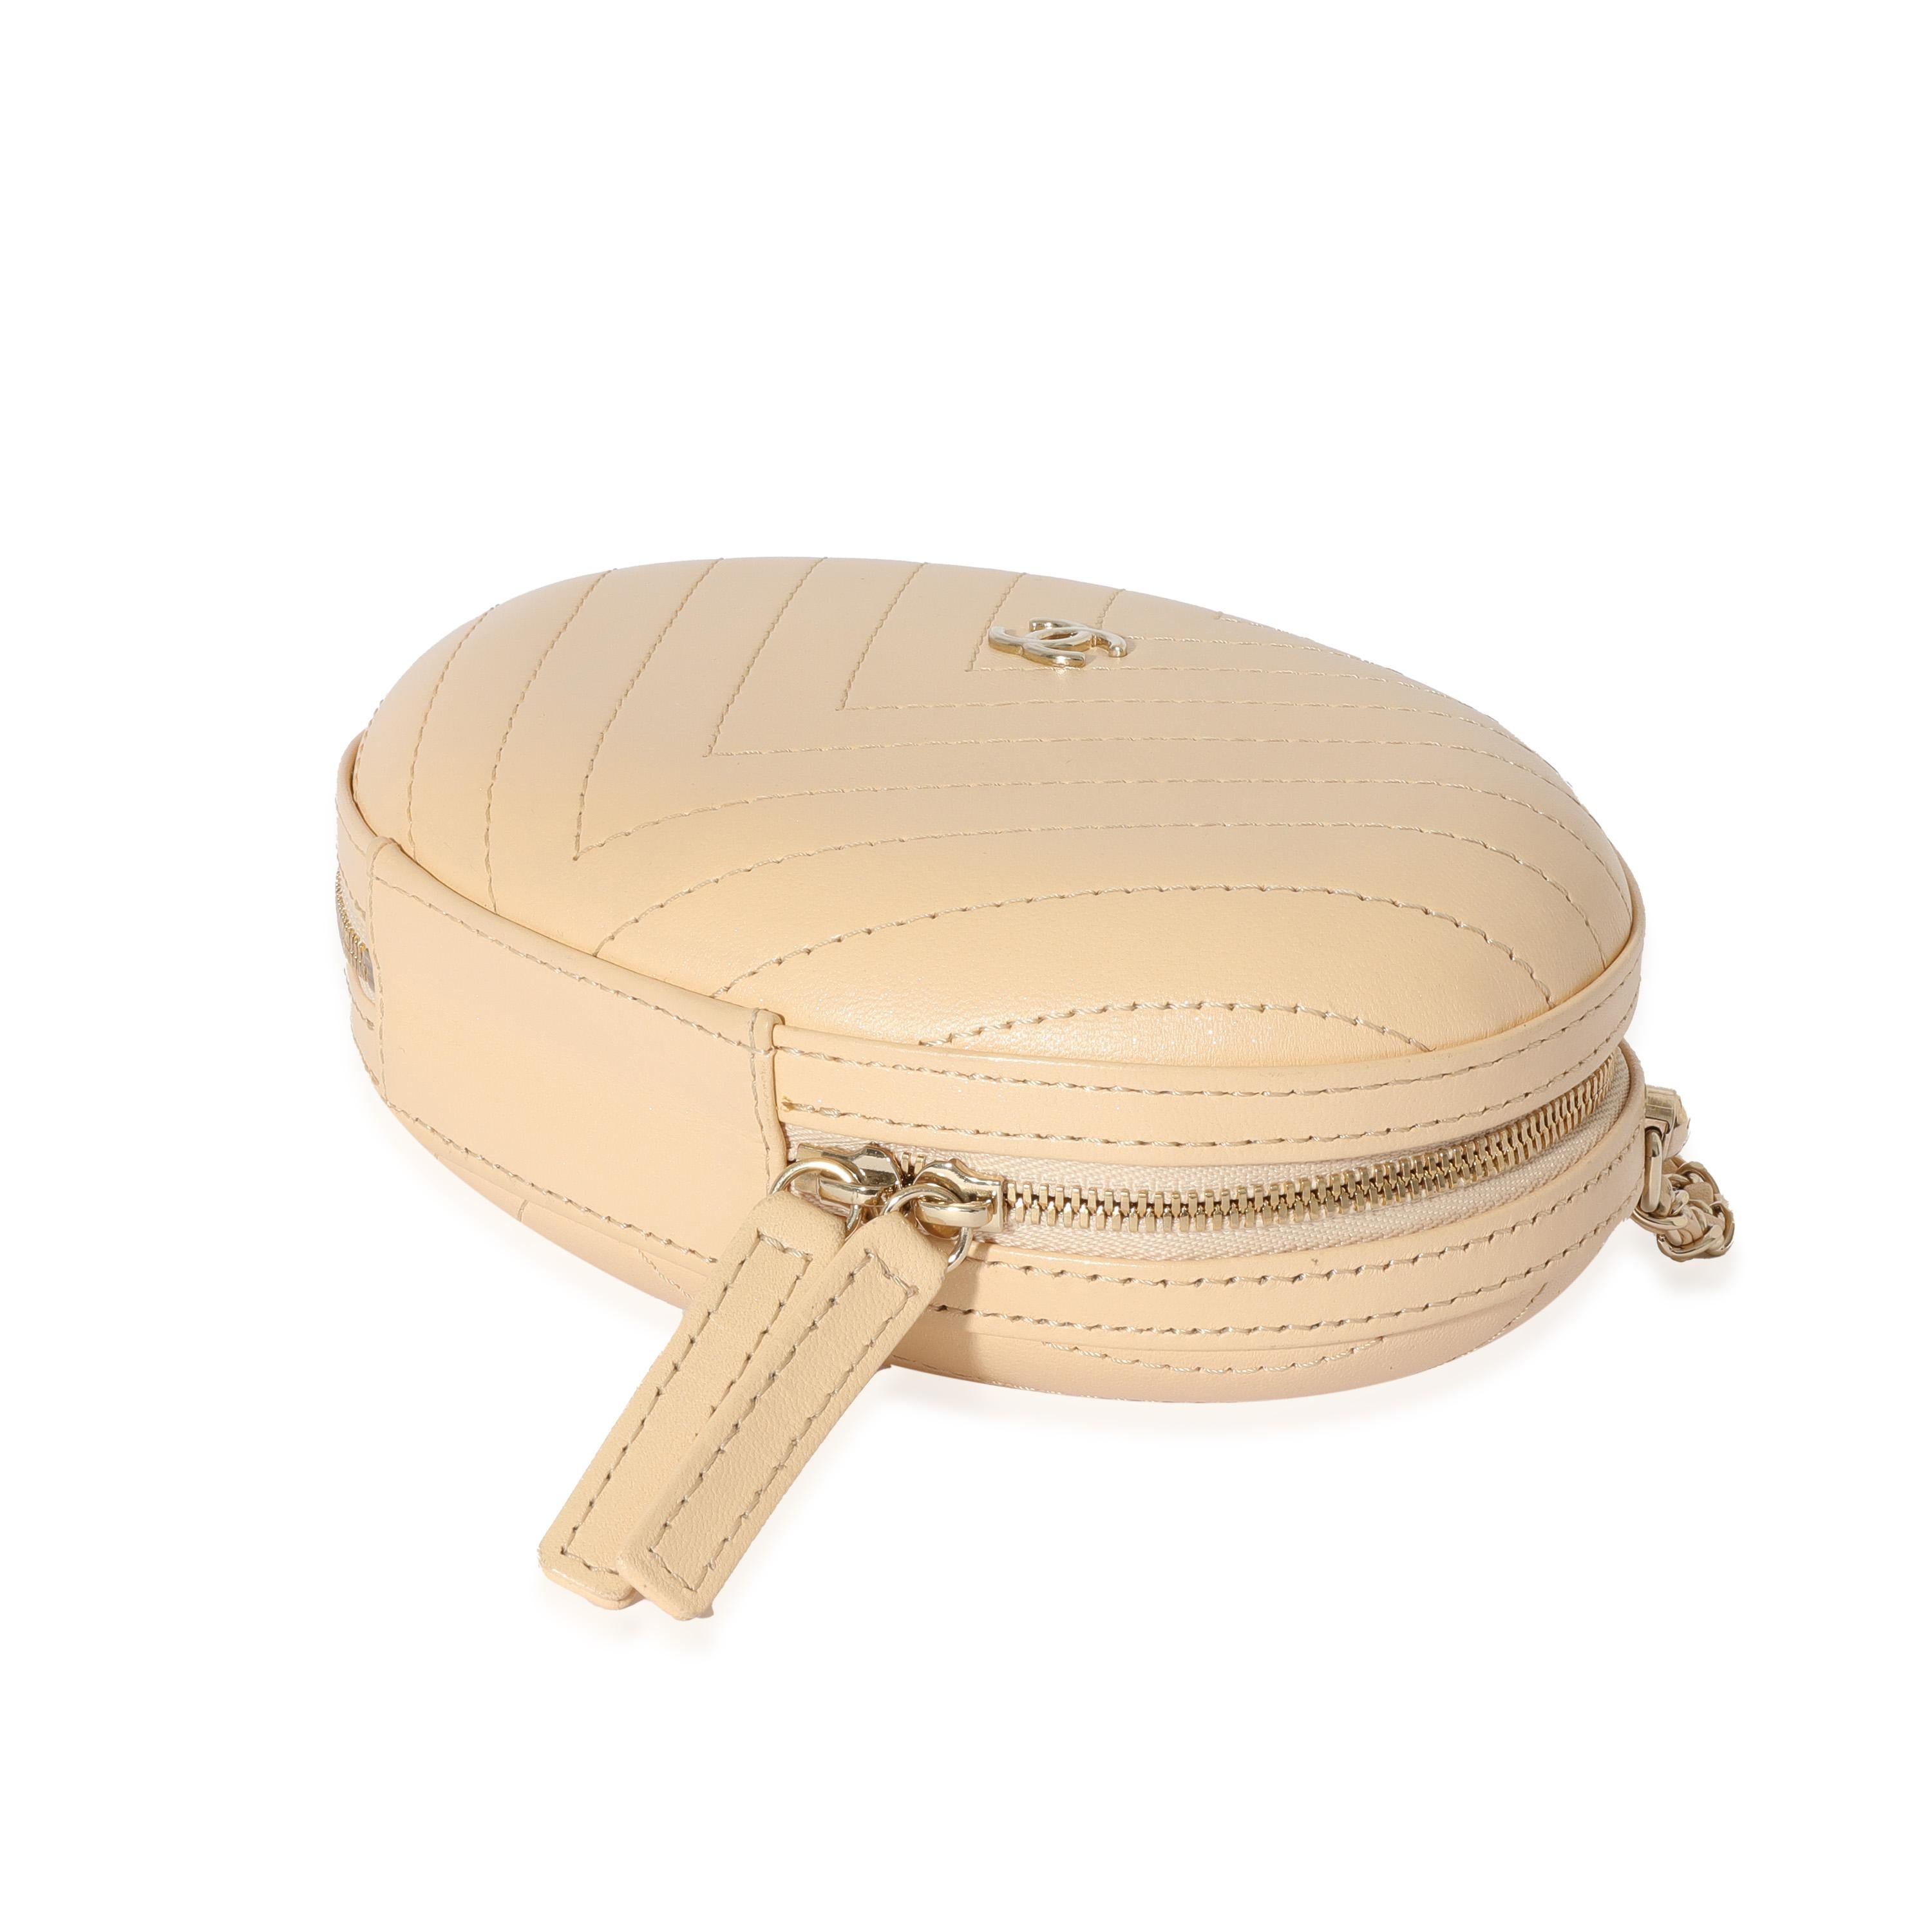 Chanel Beige Chevron Leather City Evening Box Bag For Sale 2